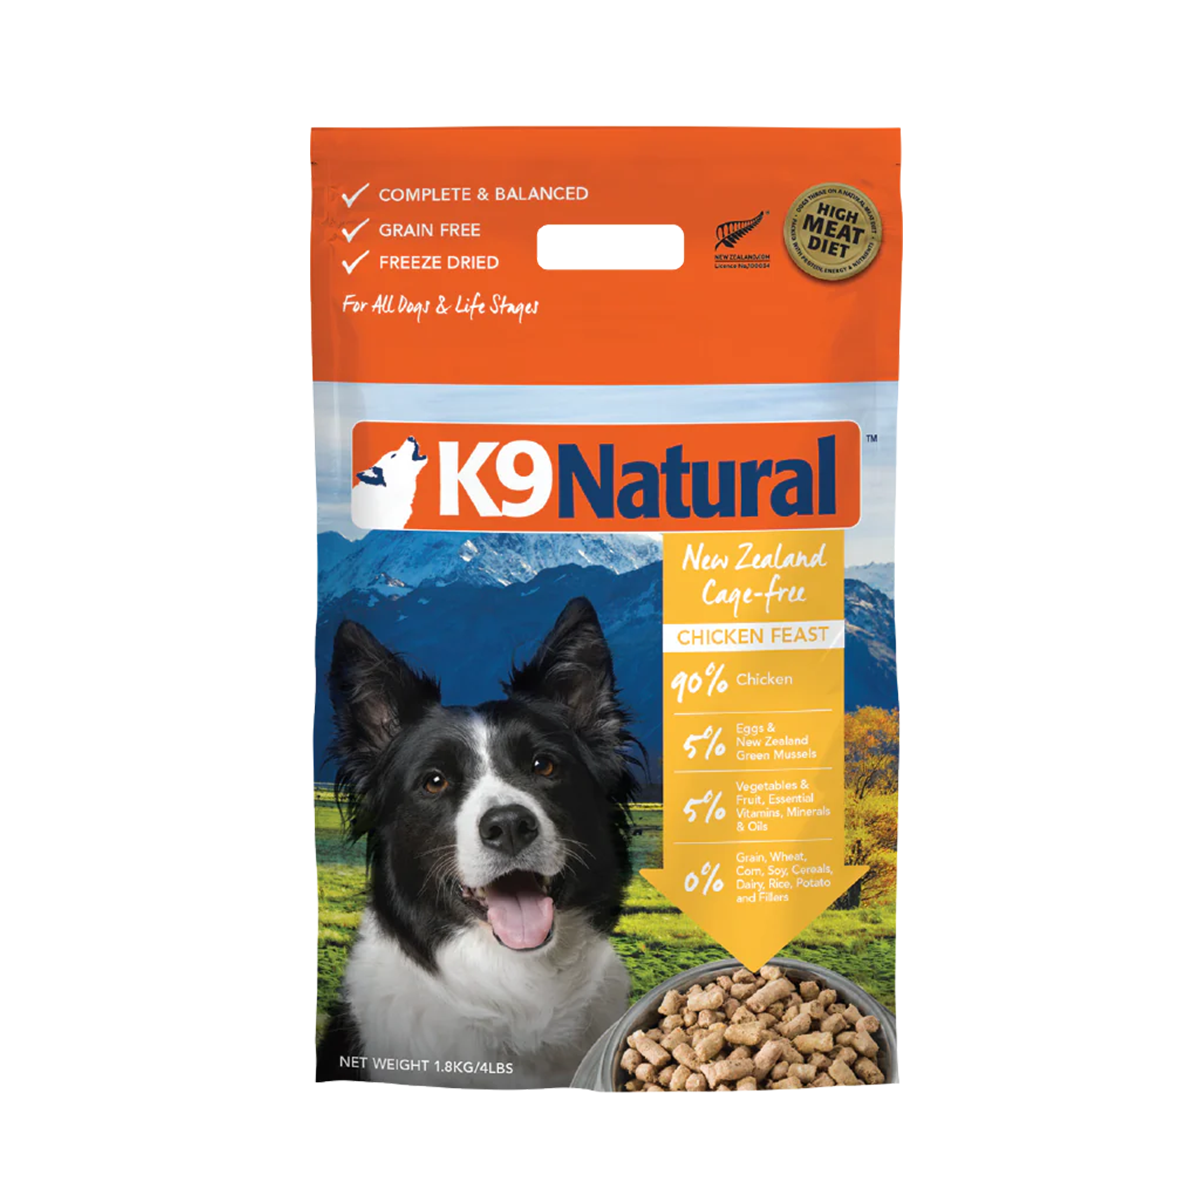 K9 Natural Freeze-Dried Dog Food - Chicken